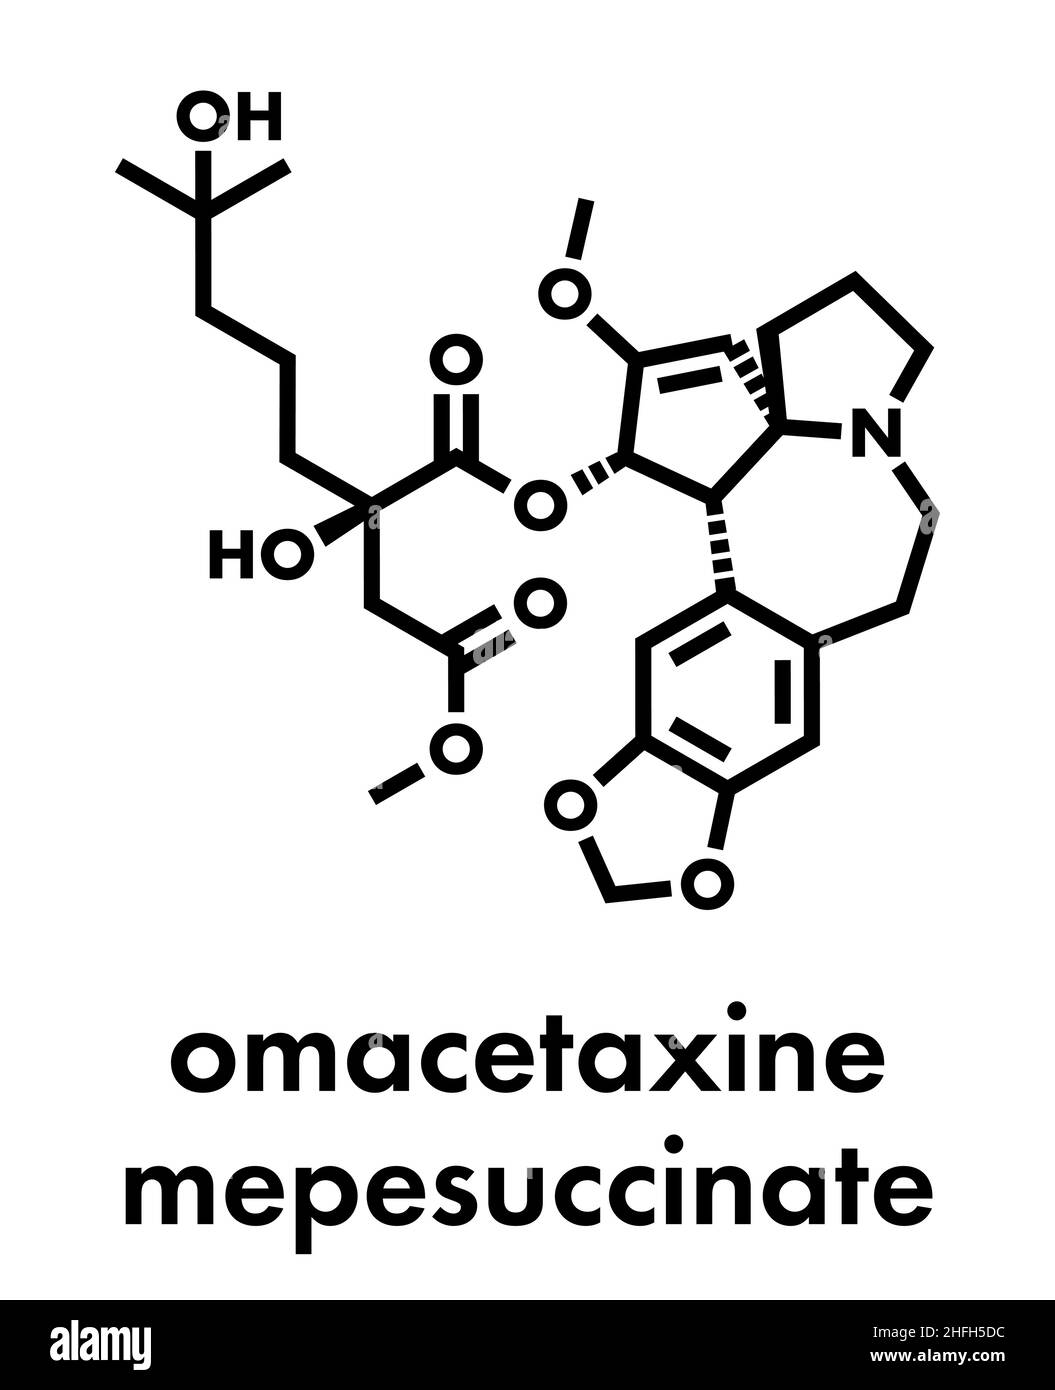 Omacetaxine mepesuccinate cancer drug molecule. Used in treatment of chronic myelogenous leukemia (CML). Skeletal formula. Stock Vector